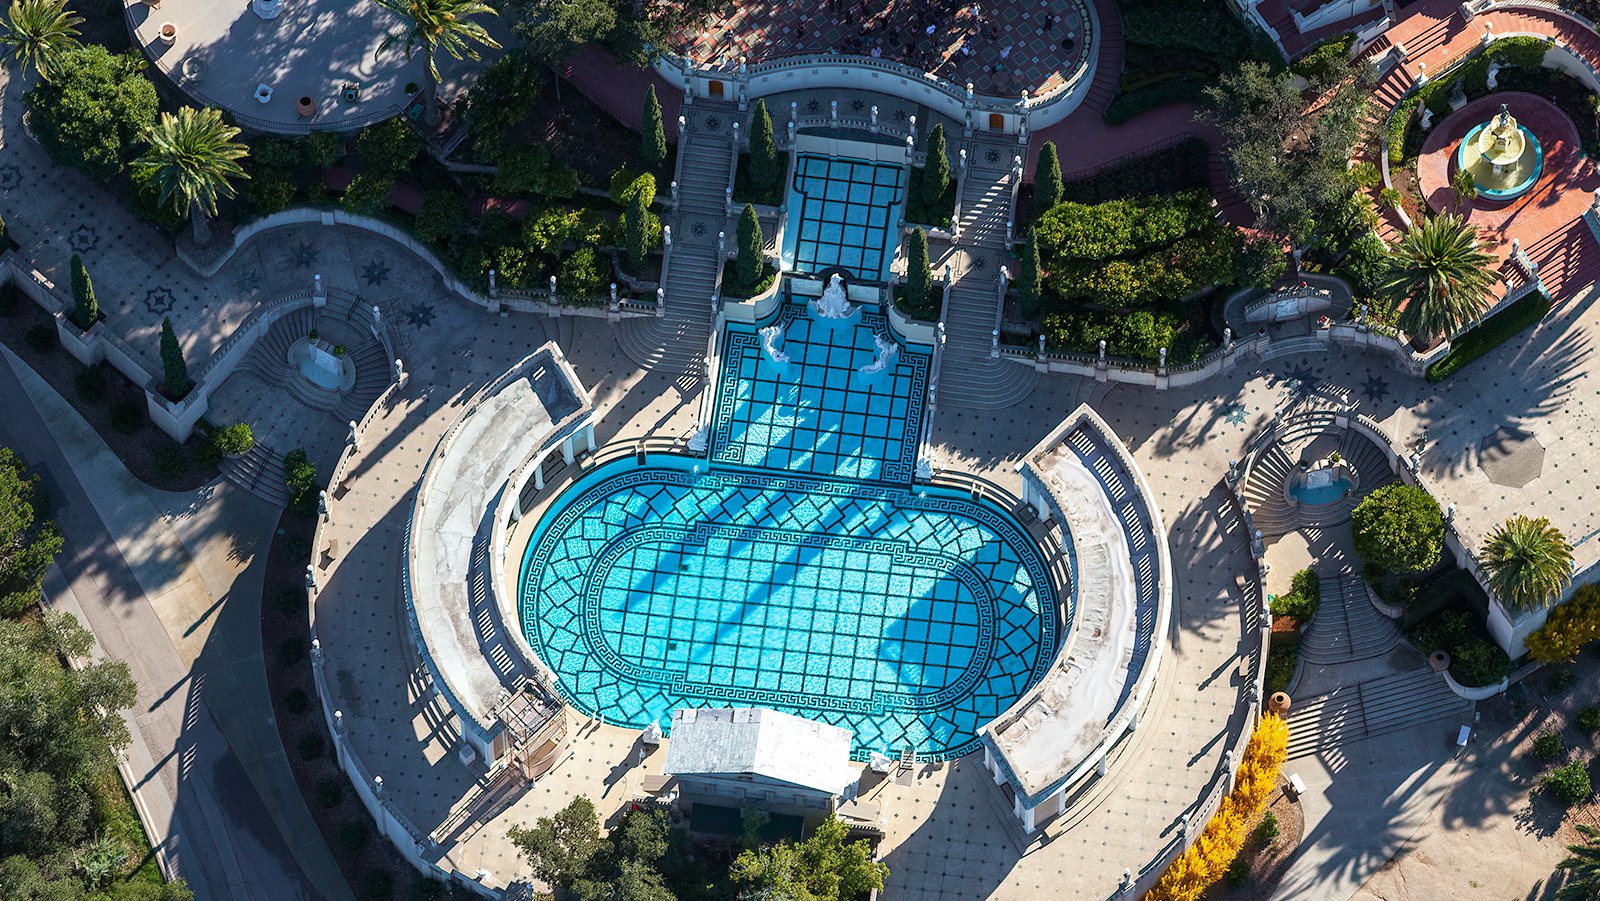 An aerial photograph of the iconic Hearst Castle Neptune Pool showcases its grandeur, with its deep blue waters surrounded by intricately designed marble columns and sculptures